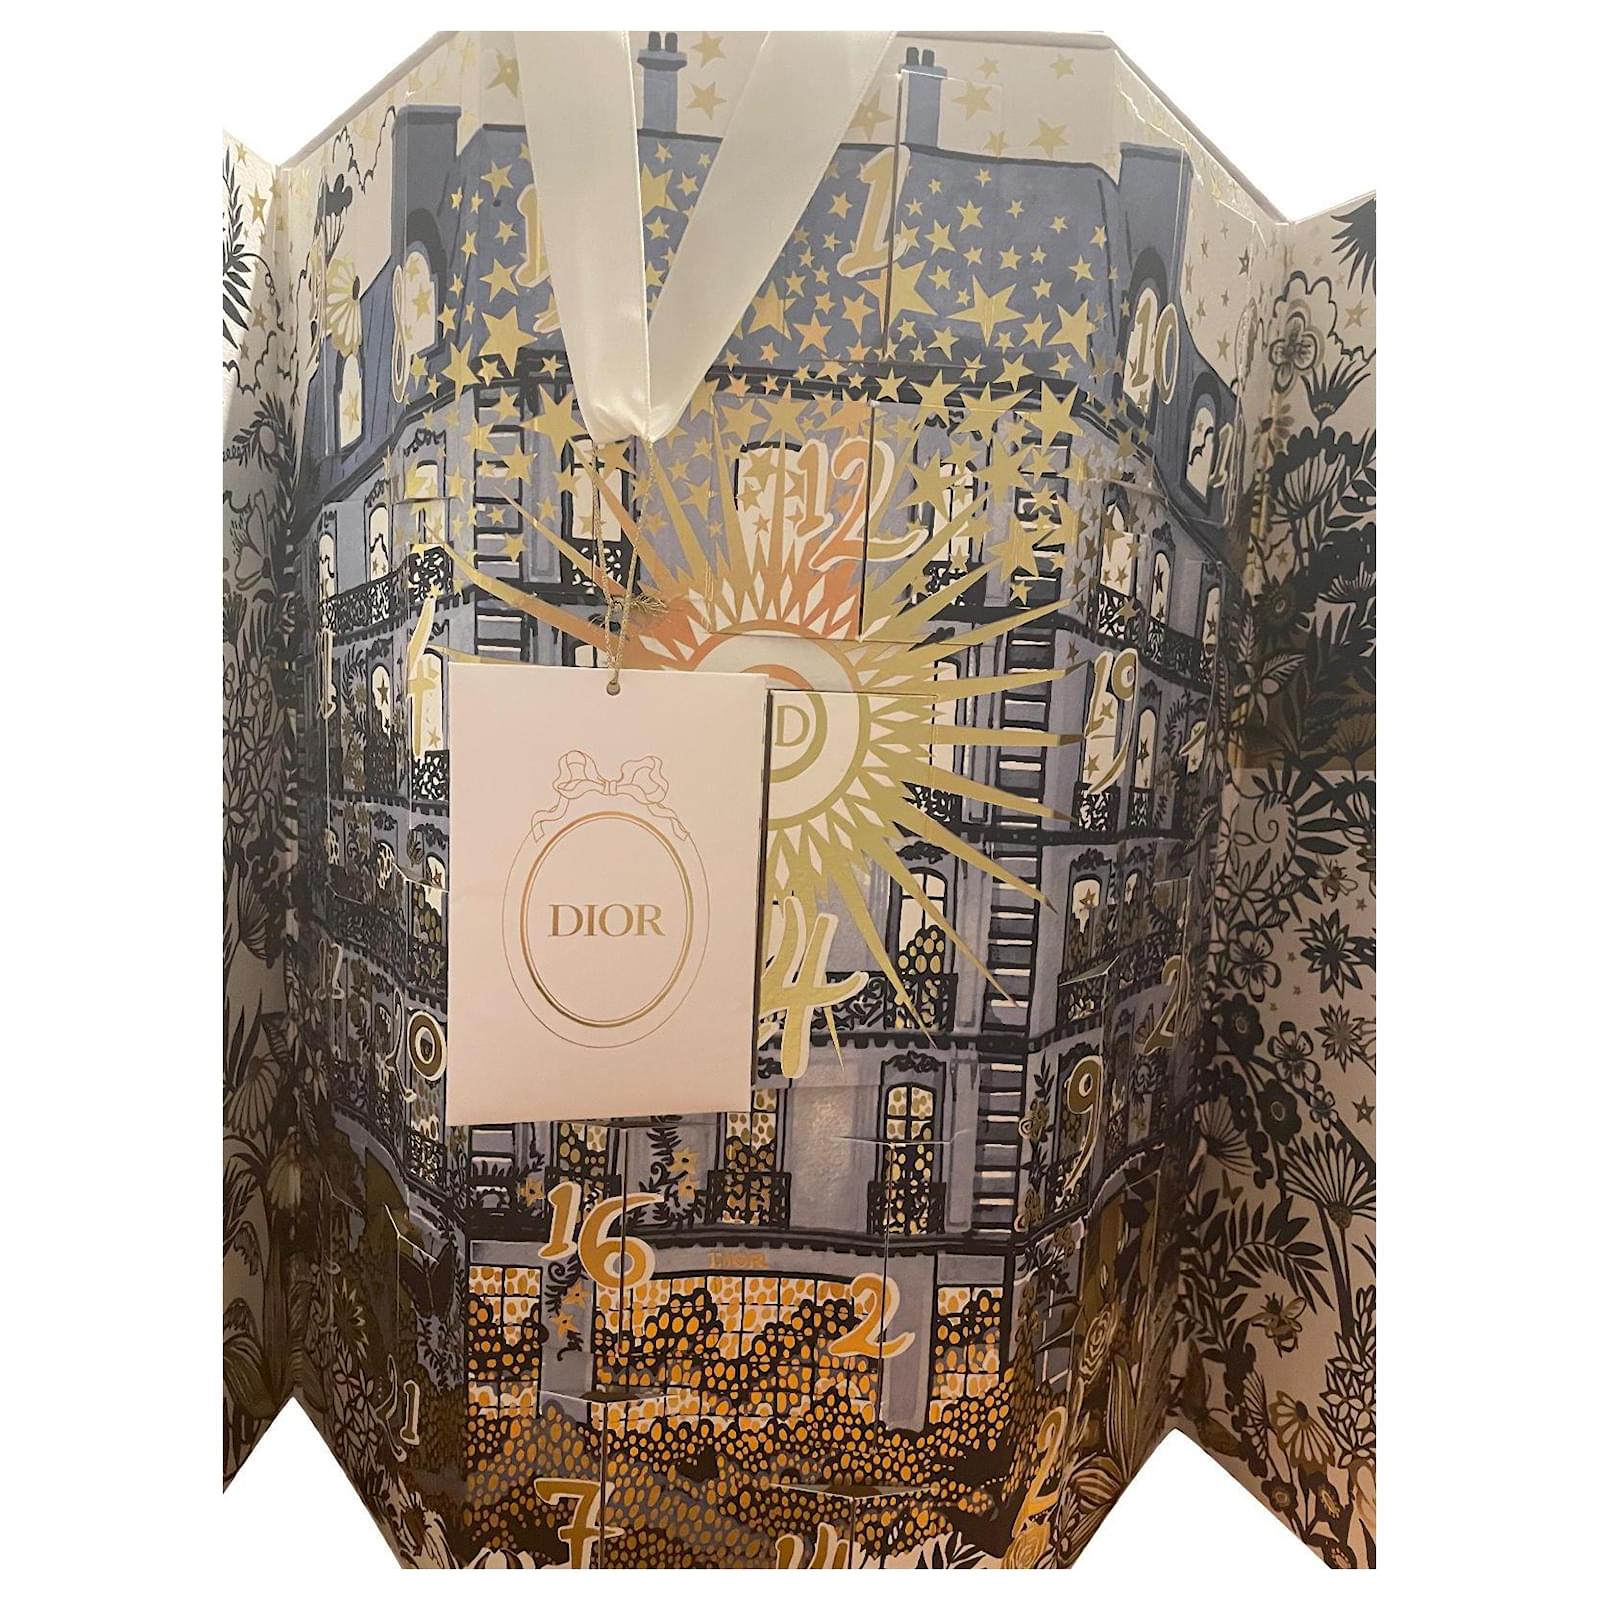 Dior  The house of Dior wishes you a happy holiday season and invites you  to discover its 2015 Advent calendar inspired by the Dior building on  avenue Montaigne in Paris  Facebook